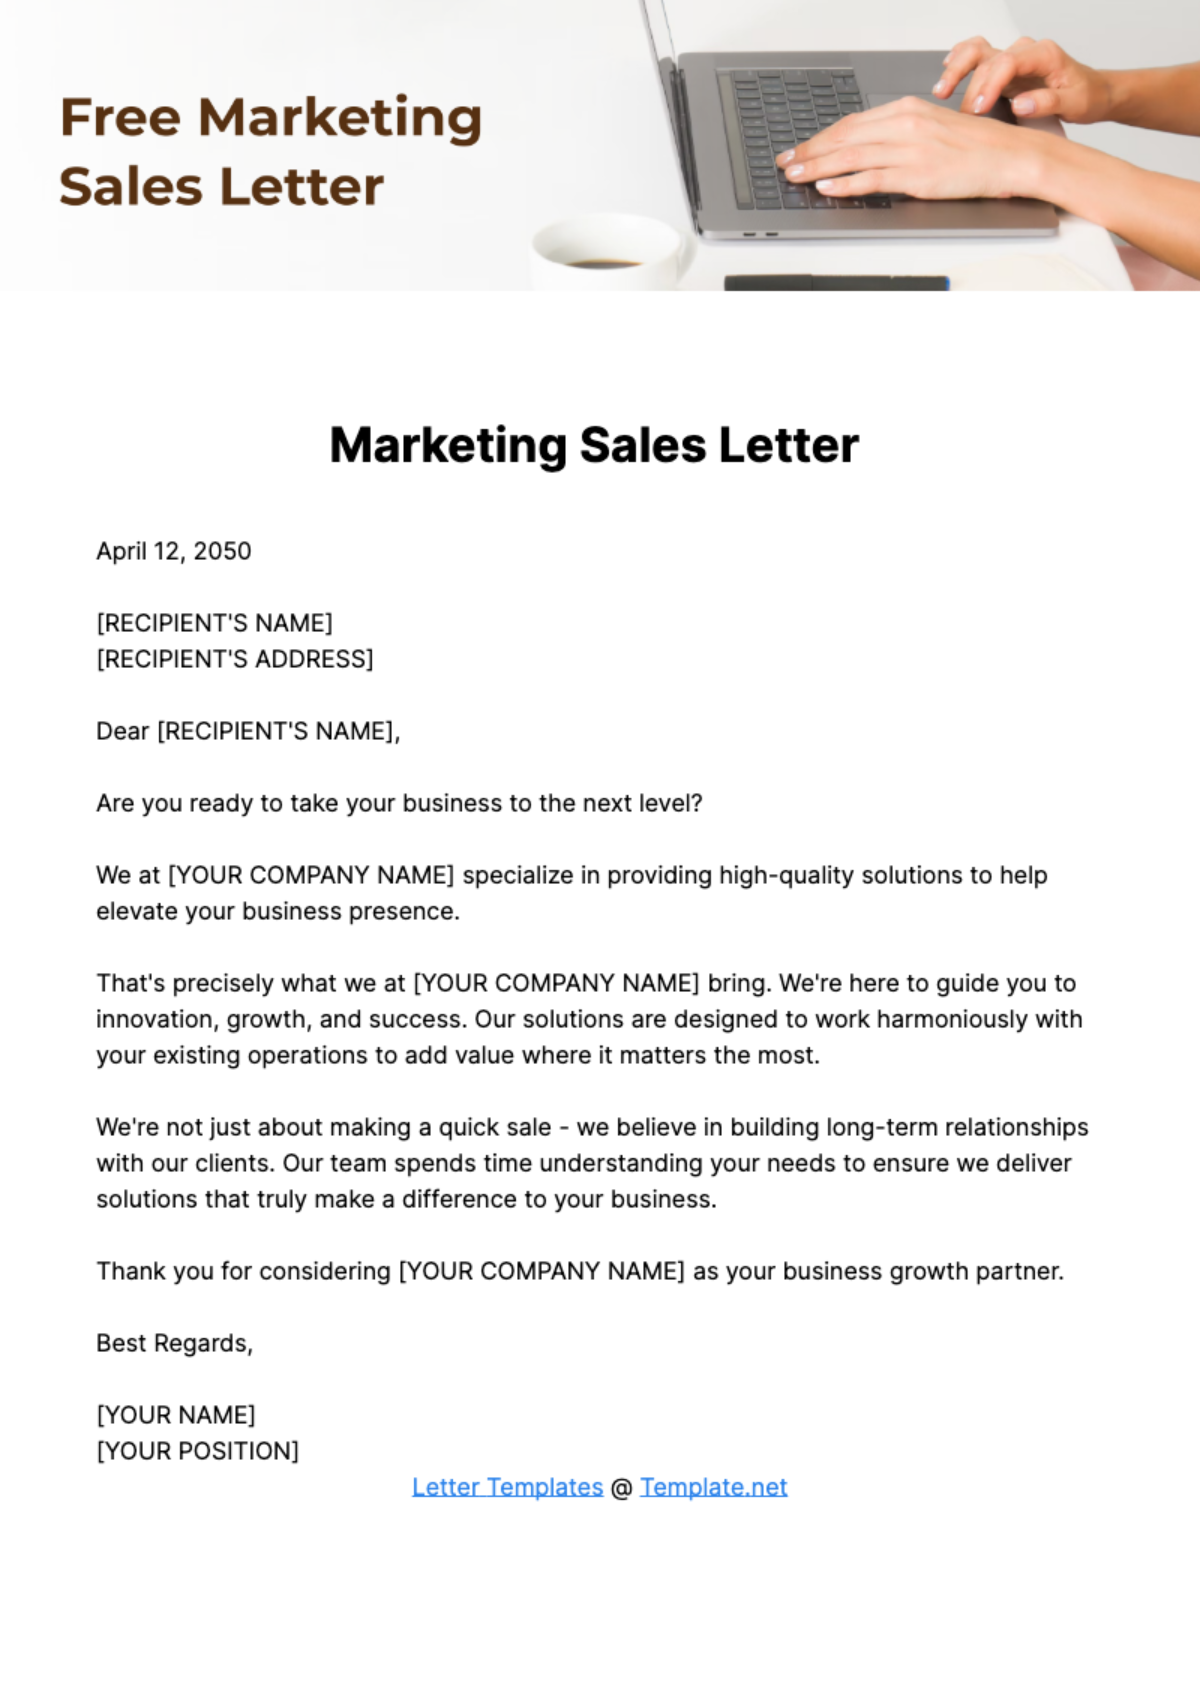 Free Marketing Sales Letter Template